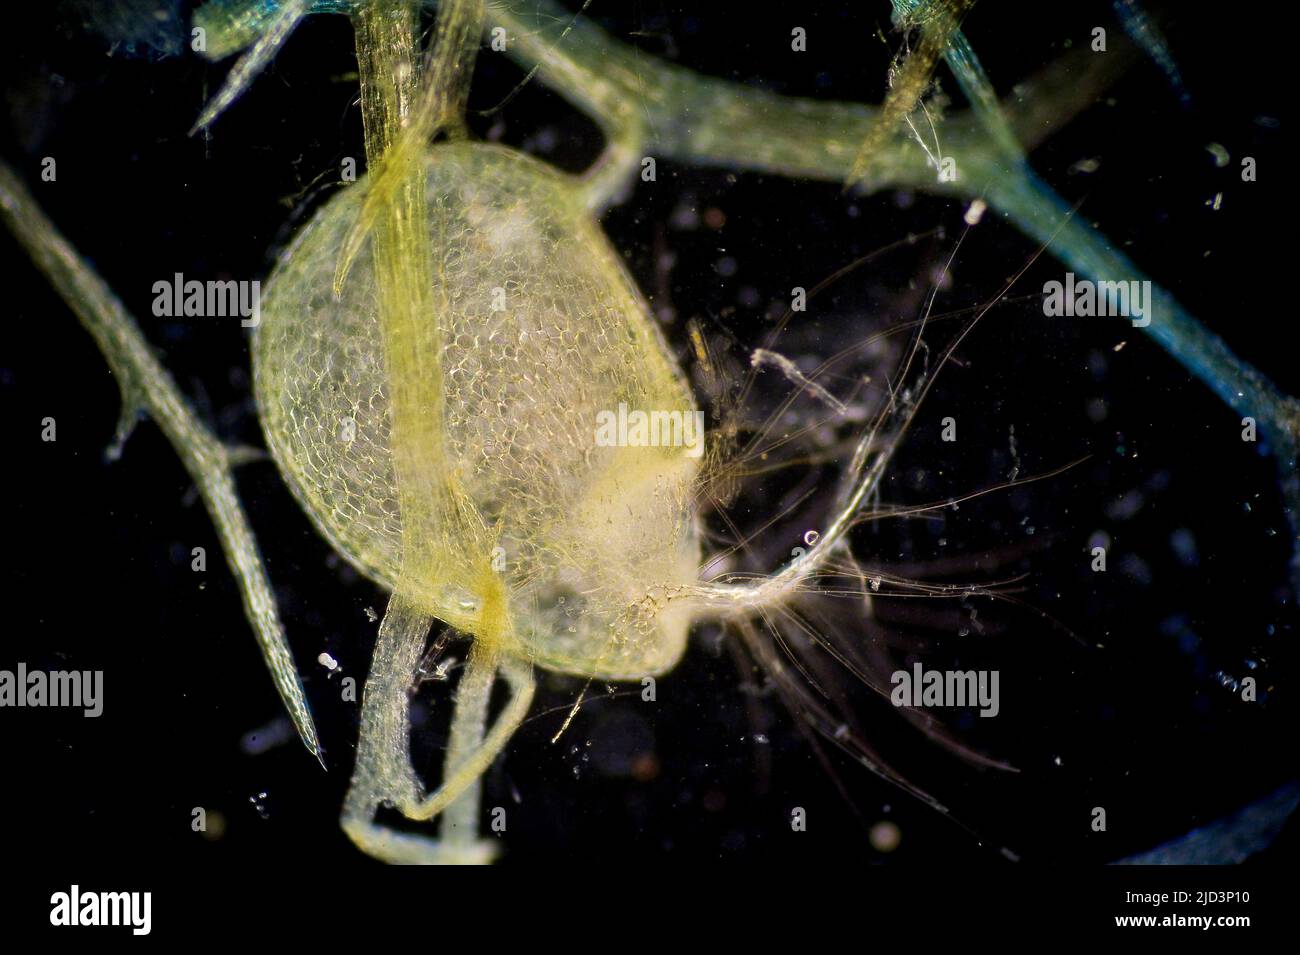 Bladder-like trap of the angiosperm Bladderworts, Utricularia sp.  The bladder is about 0,3 x 0,2 mm across. 40X at the film plane. From south-western Stock Photo